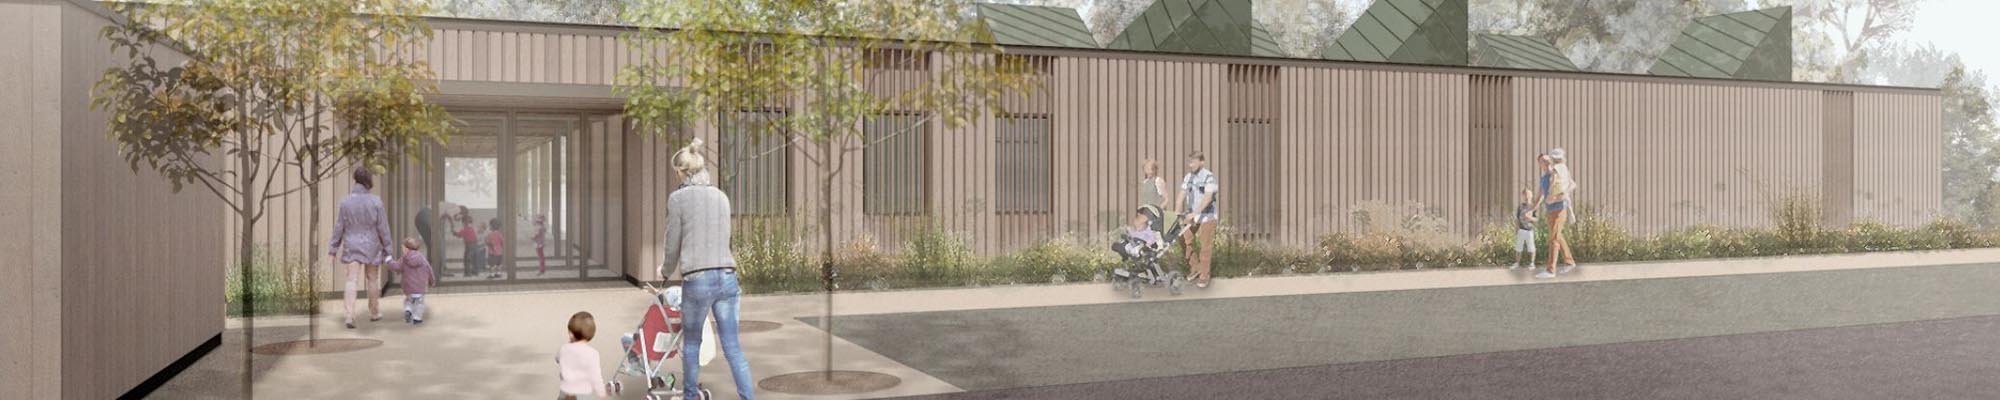 Artistic rendering of Nursery and Forest School